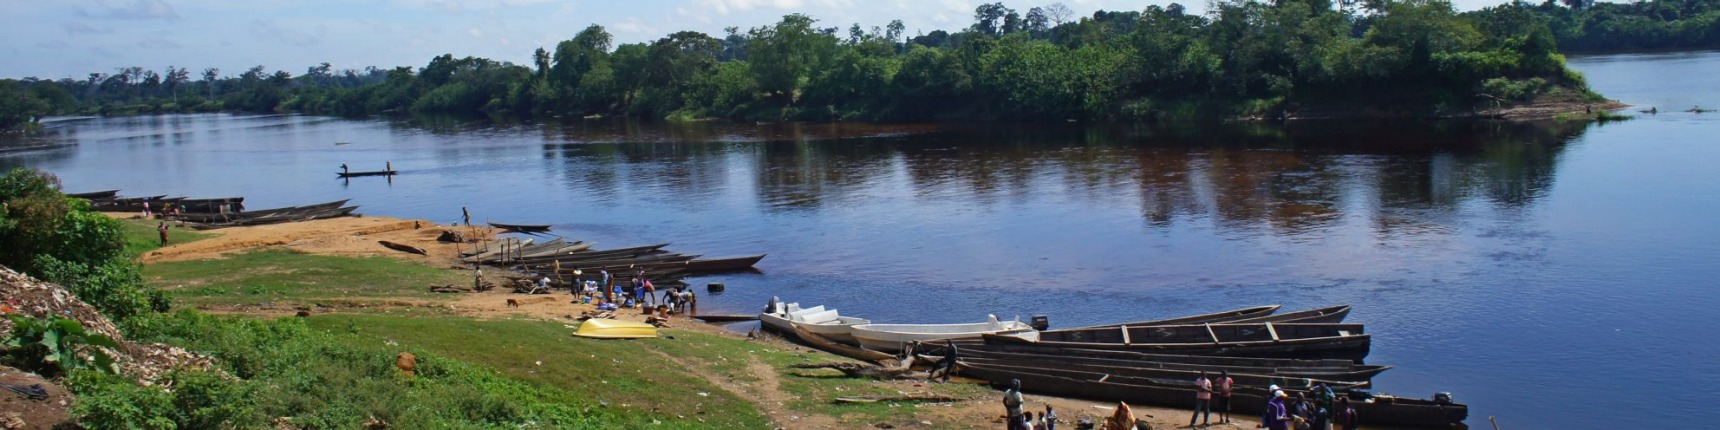 The Congo river in Dongou, Likouala district, Republic of Congo (Congo Brazzaville), March 2014. Editorial use only.